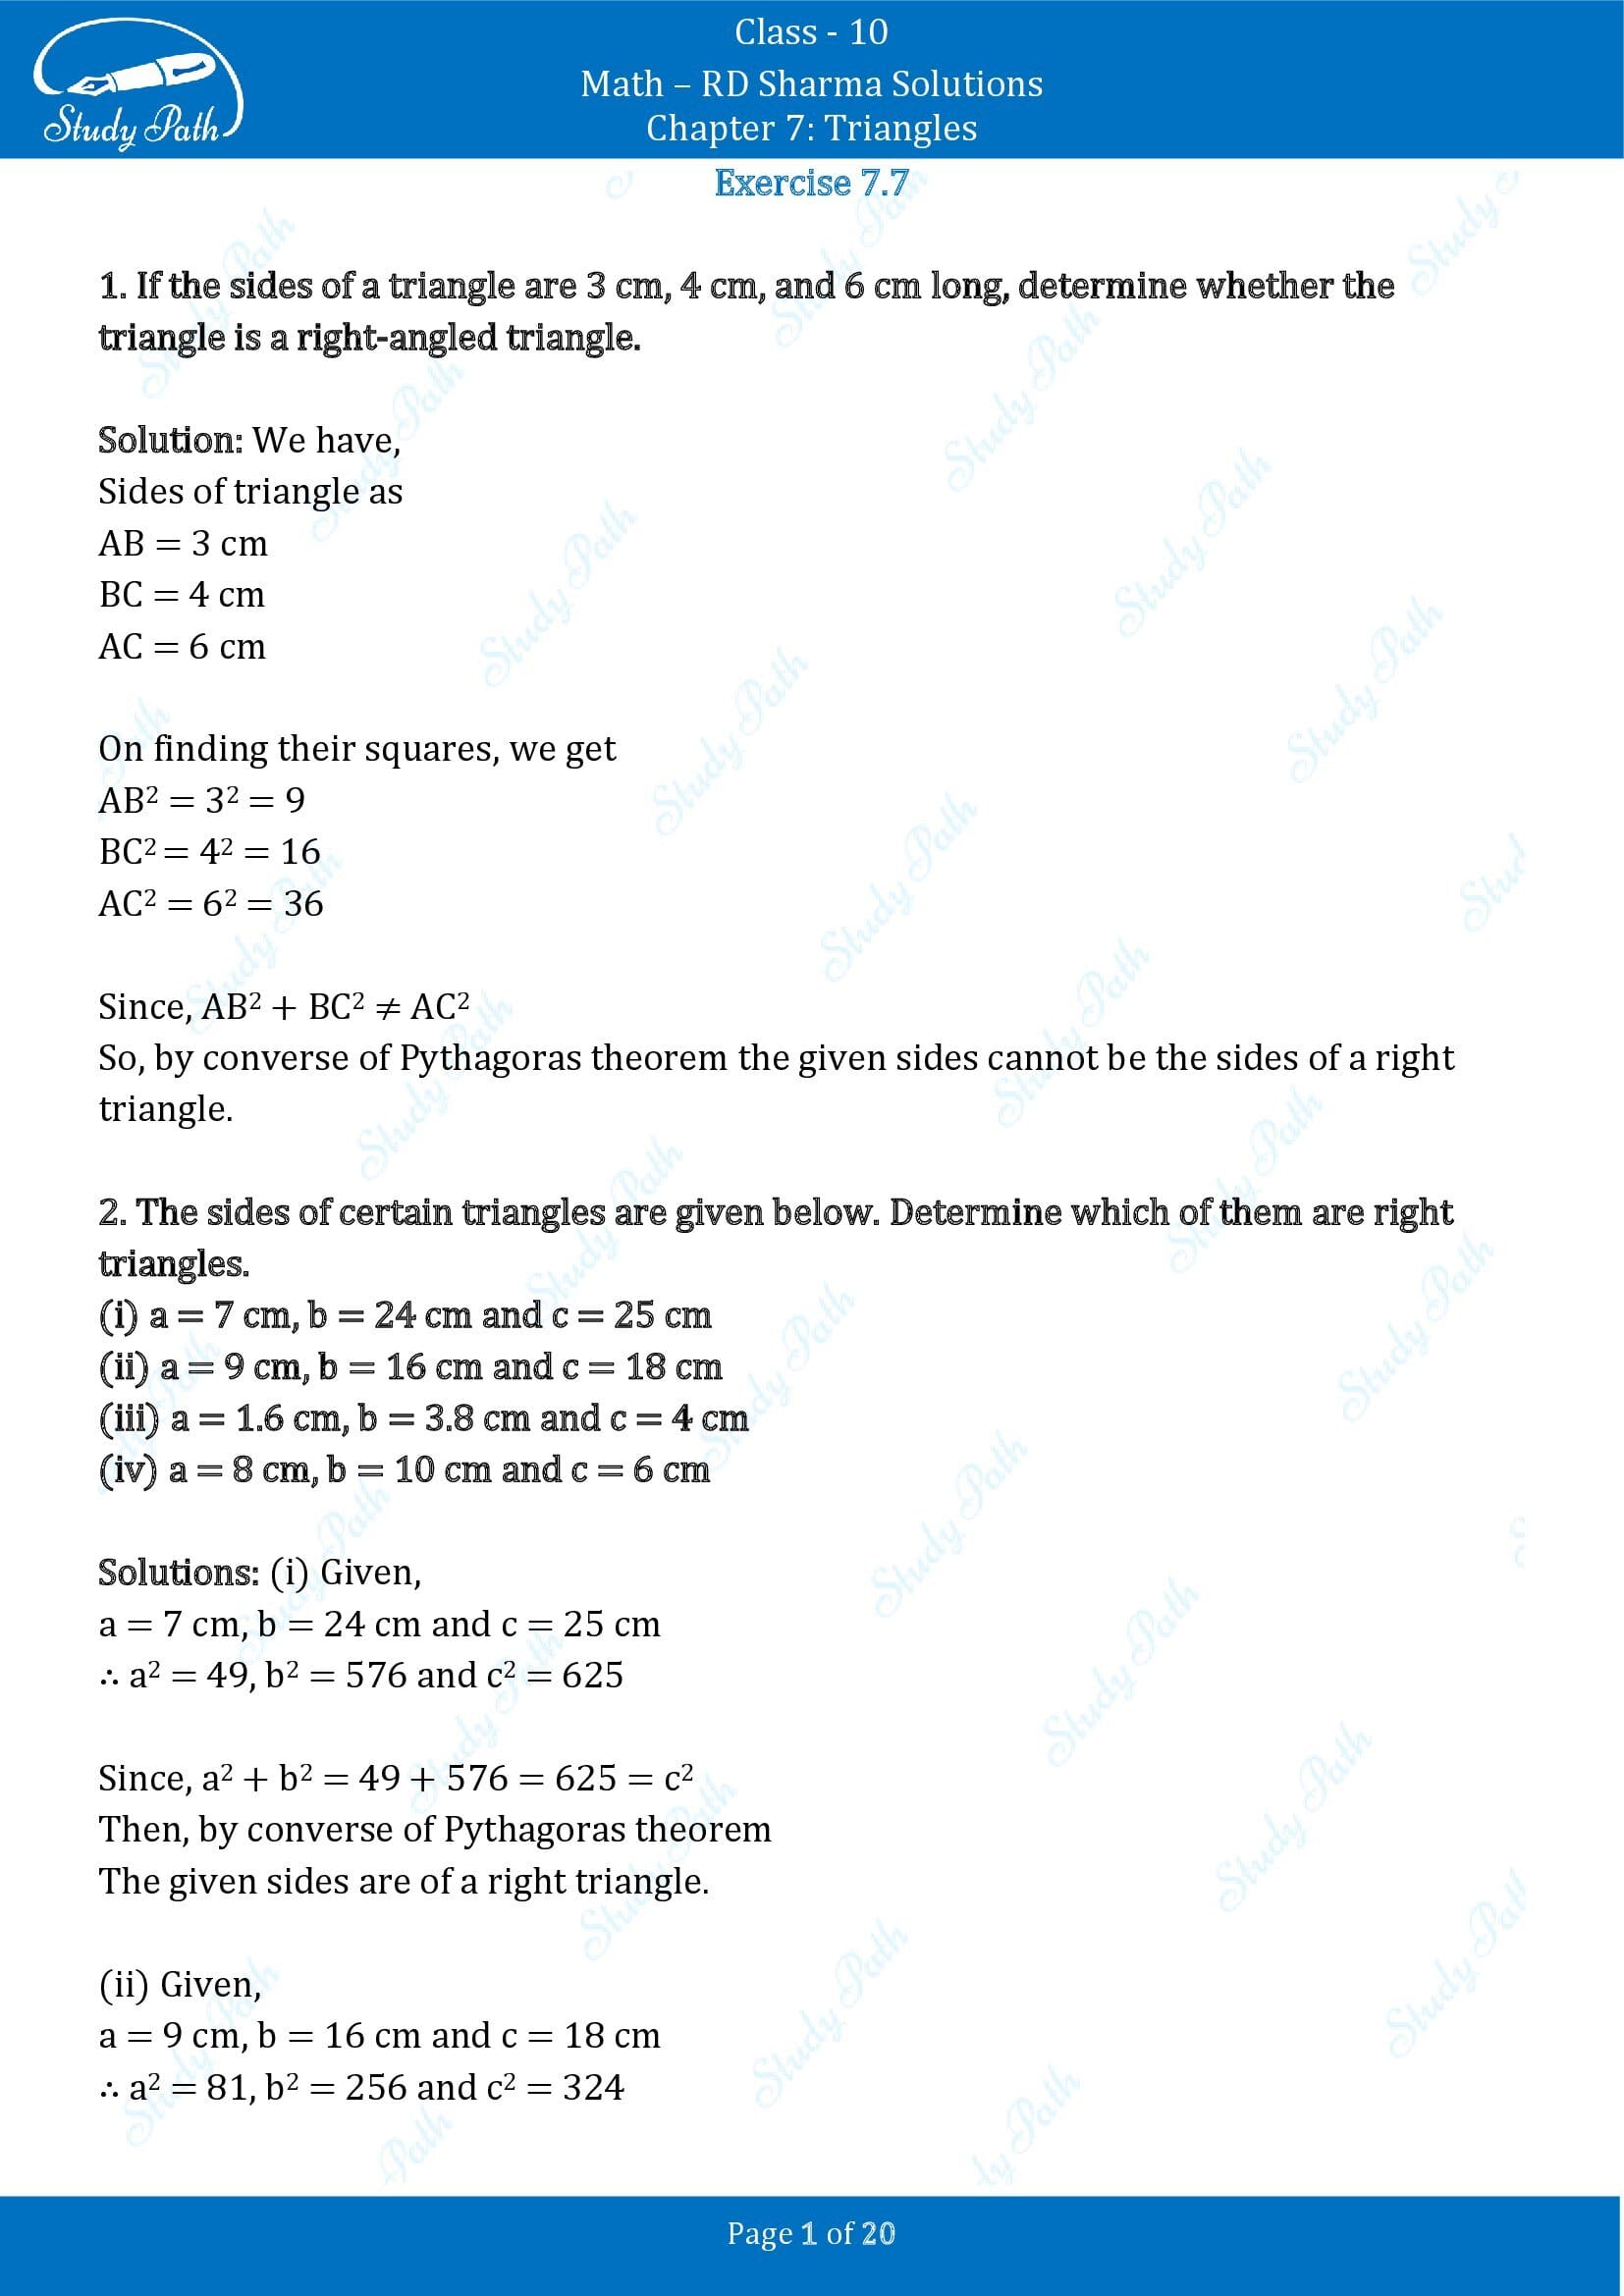 RD Sharma Solutions Class 10 Chapter 7 Triangles Exercise 7.7 00001